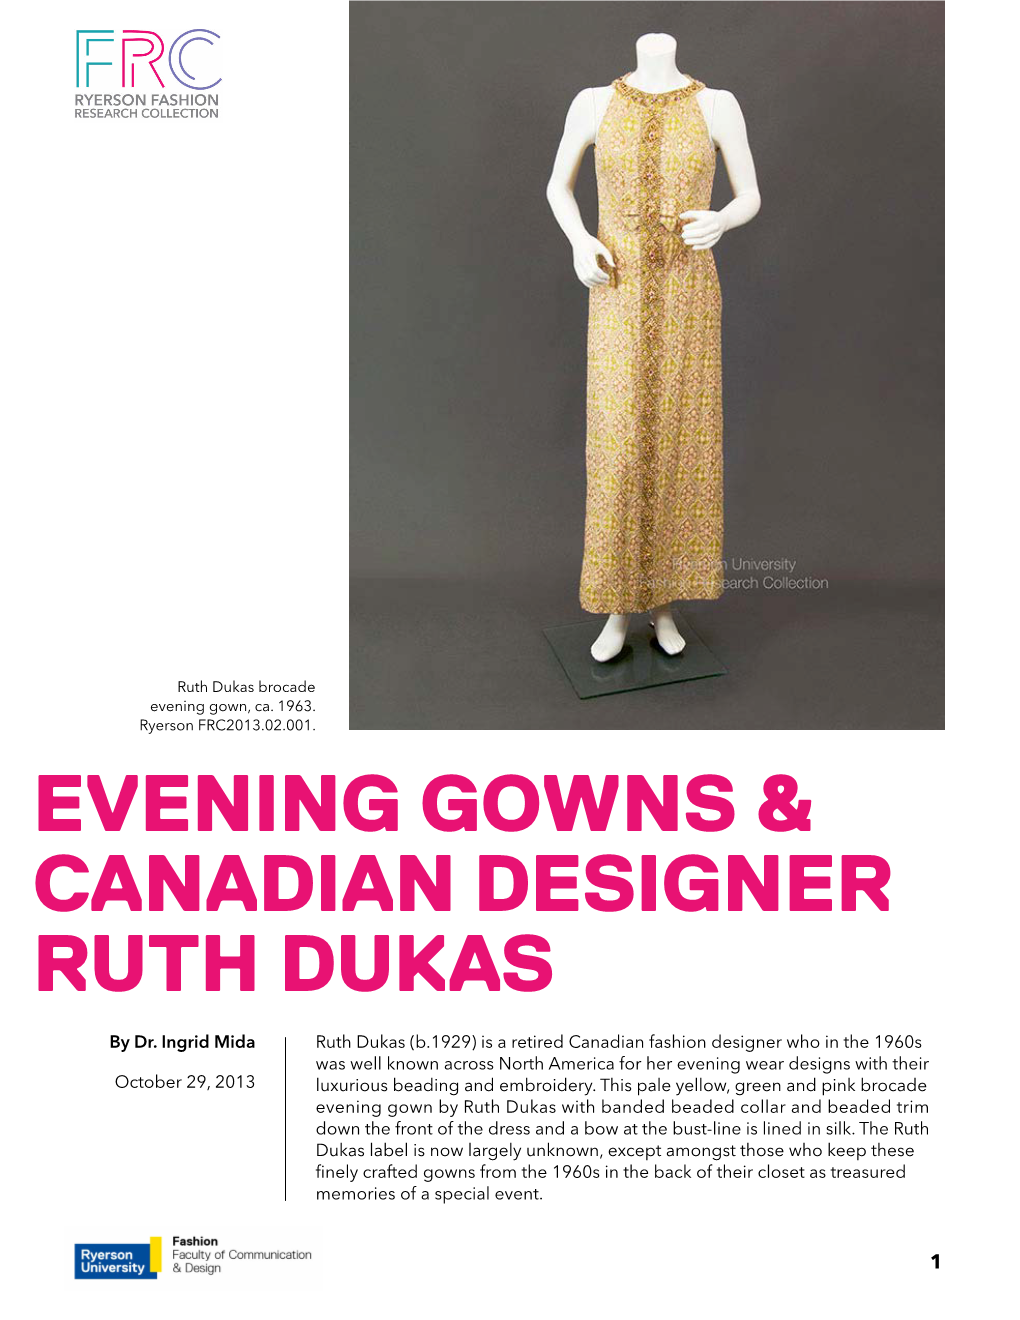 Evening Gowns and Canadian Designer Ruth Dukas